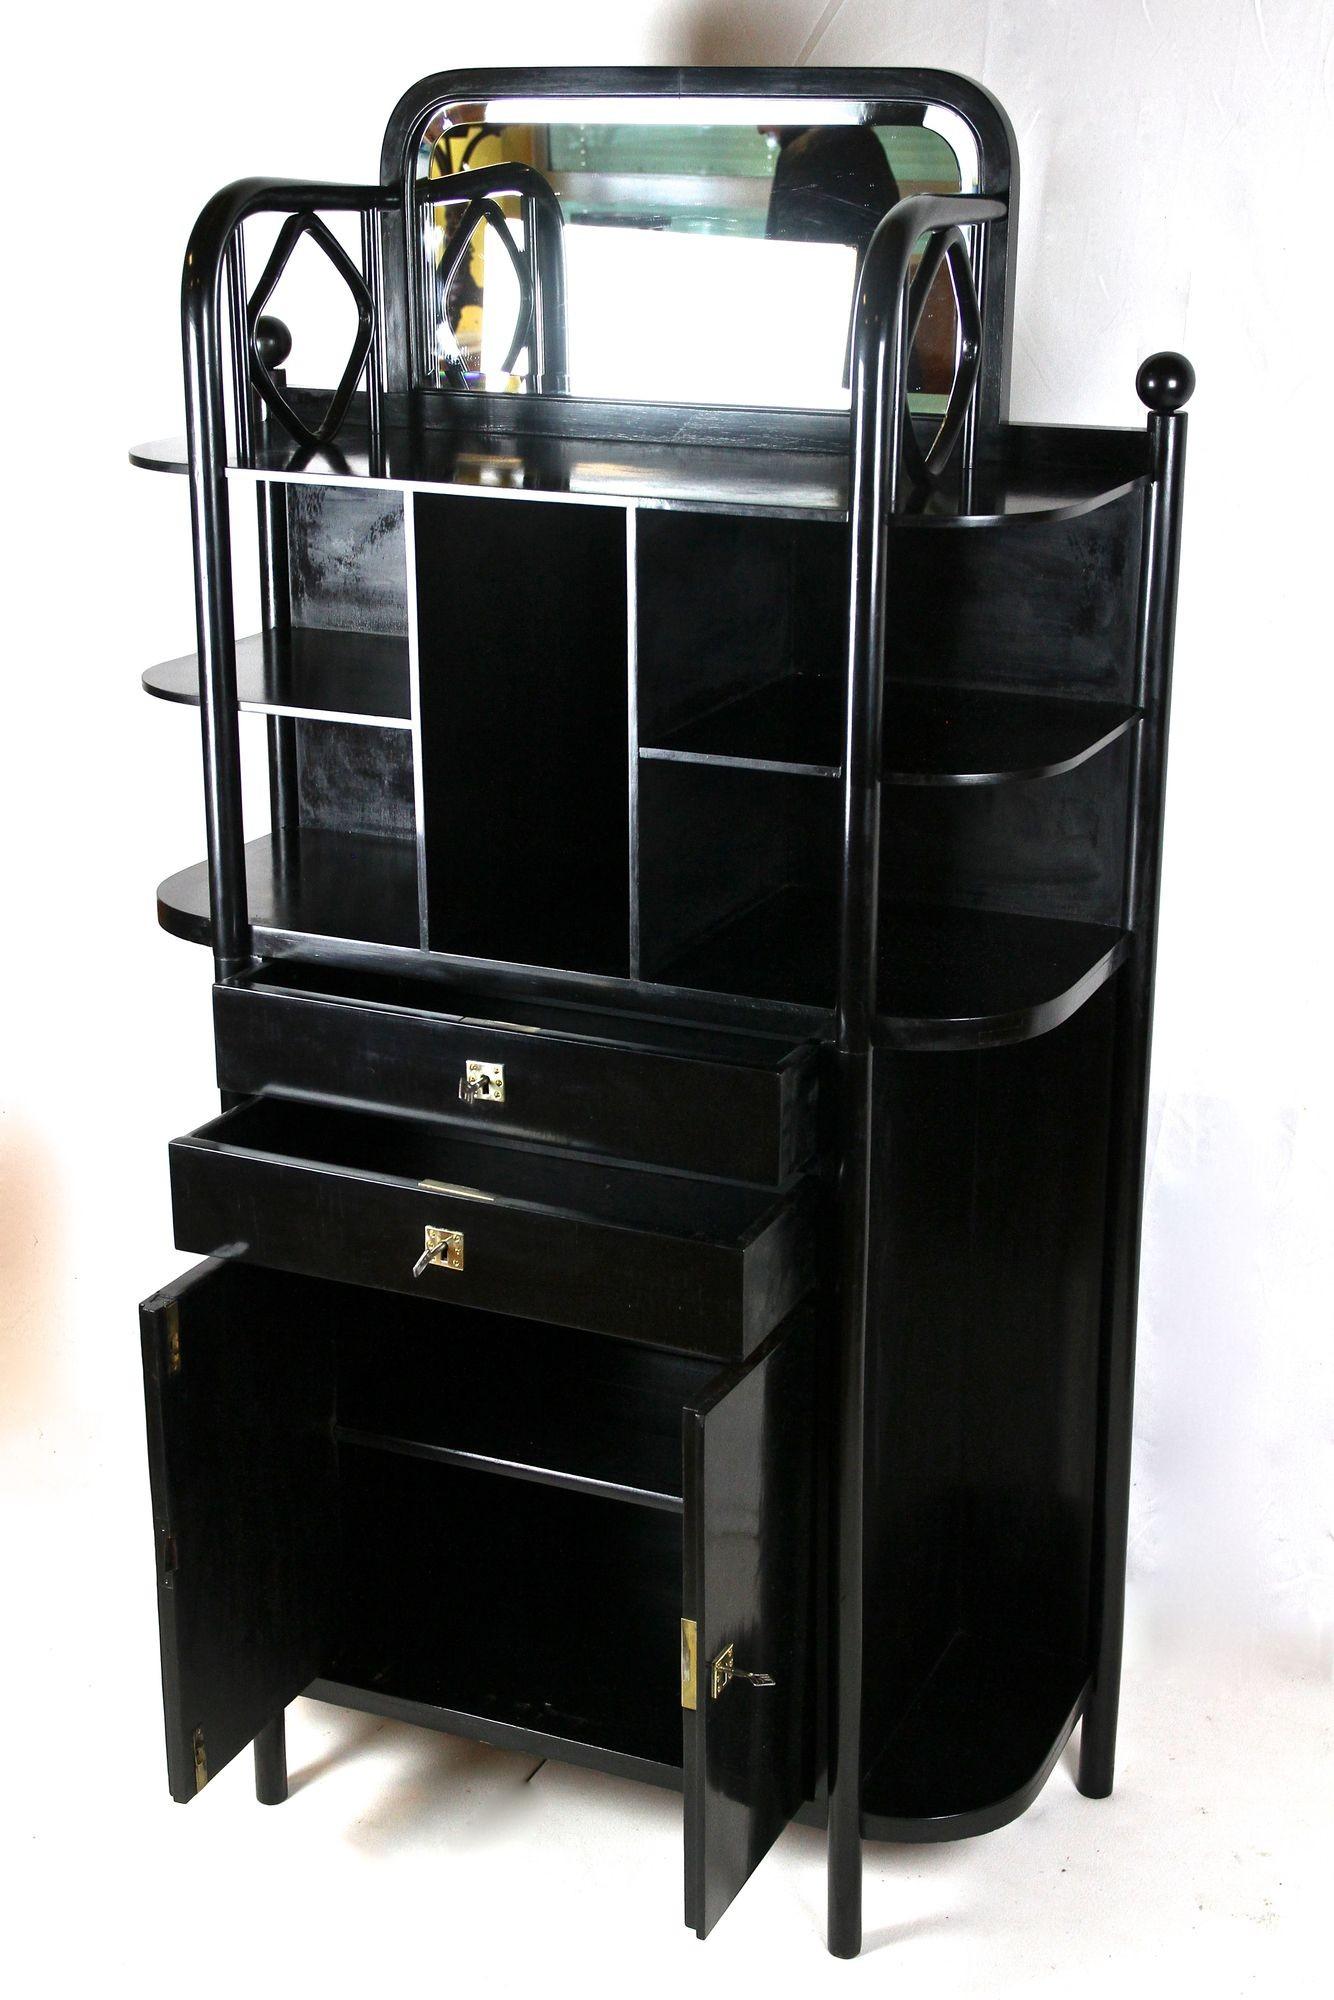 Brass Black Art Nouveau Display Cabinet by Josef Hoffmann for Thonet, AT ca. 1905 For Sale